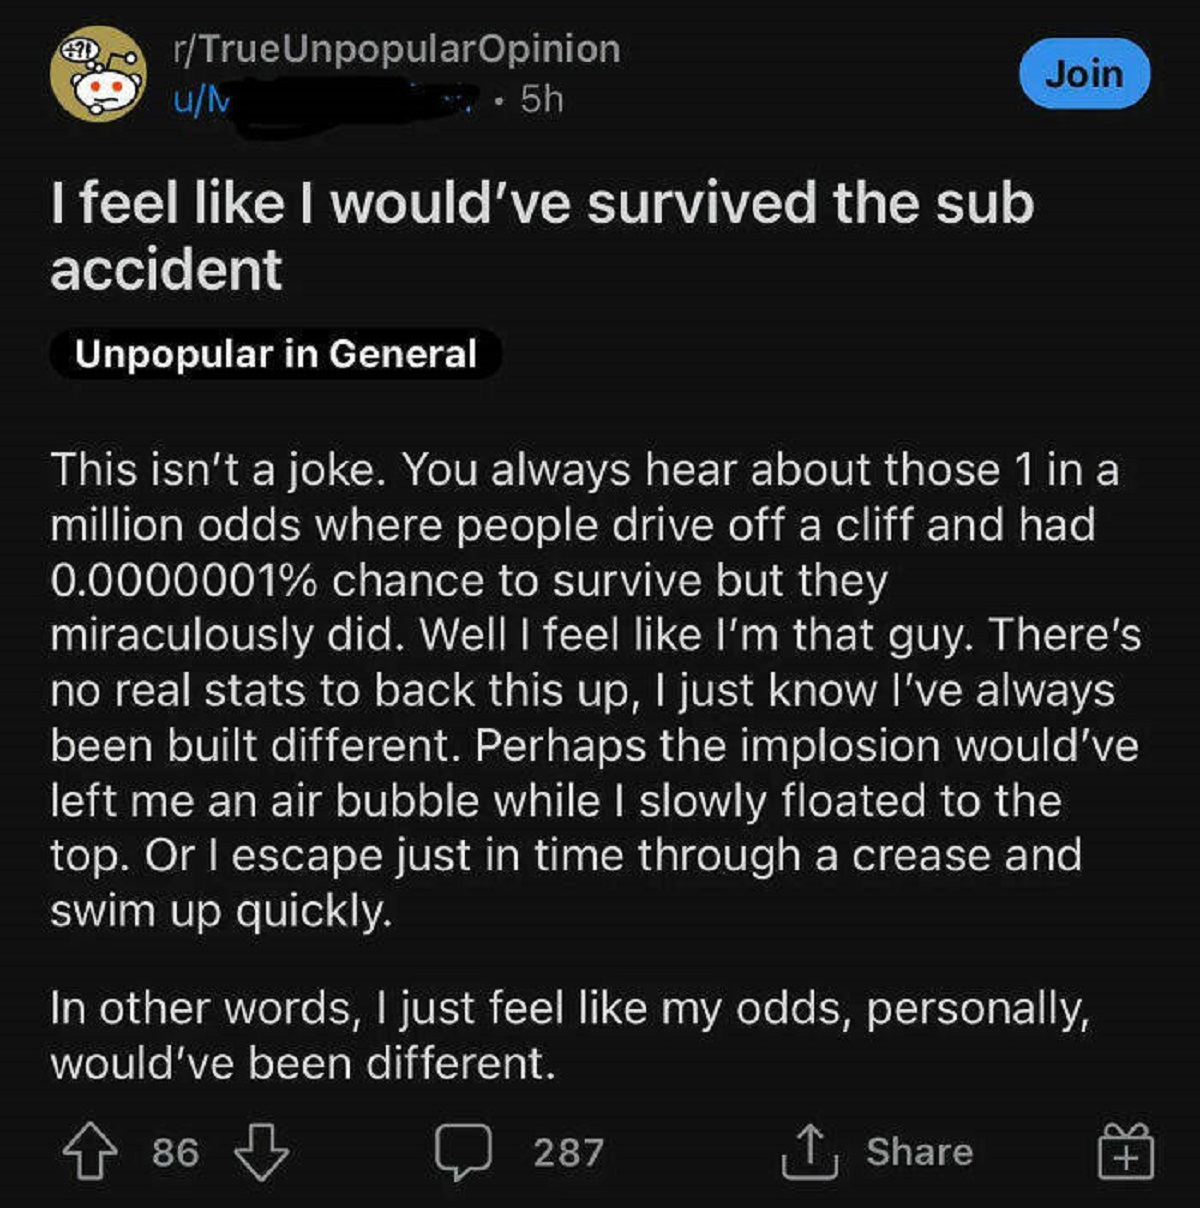 feel like i would have survived - DrTrueUnpopular Opinion uM .5h Join I feel I would've survived the sub accident Unpopular in General This isn't a joke. You always hear about those 1 in a million odds where people drive off a cliff and had 0.0000001% cha